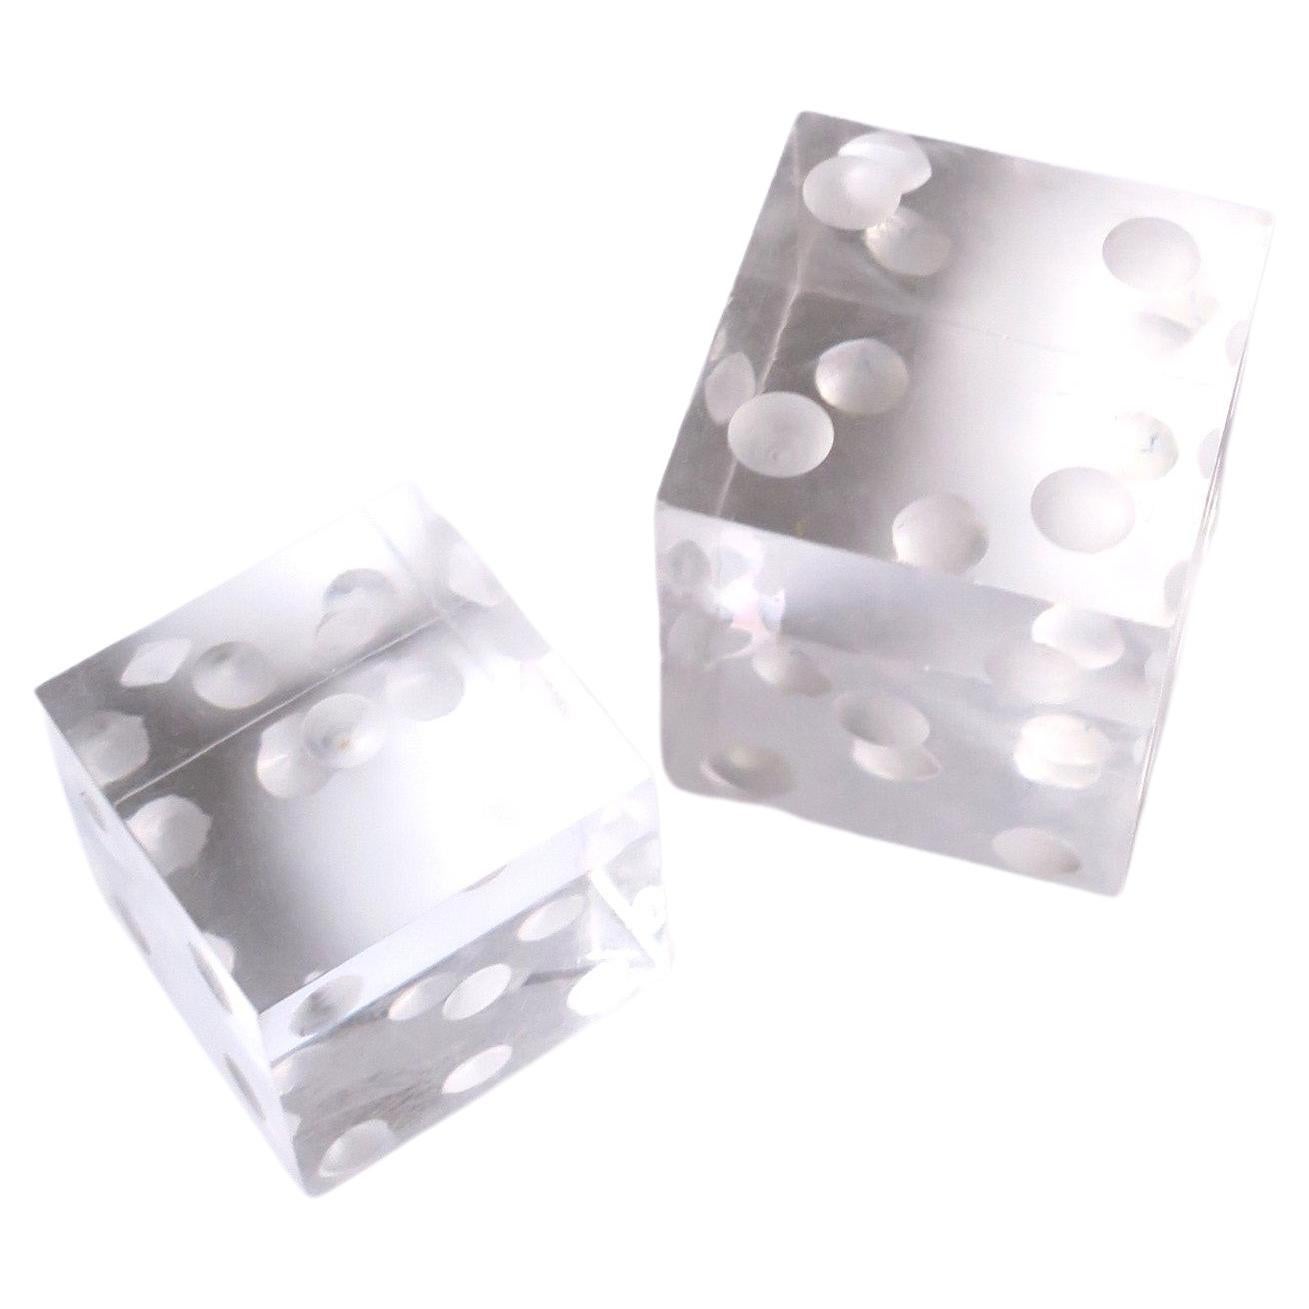 Lucite Dice Decorative Objects, Pair/Set For Sale